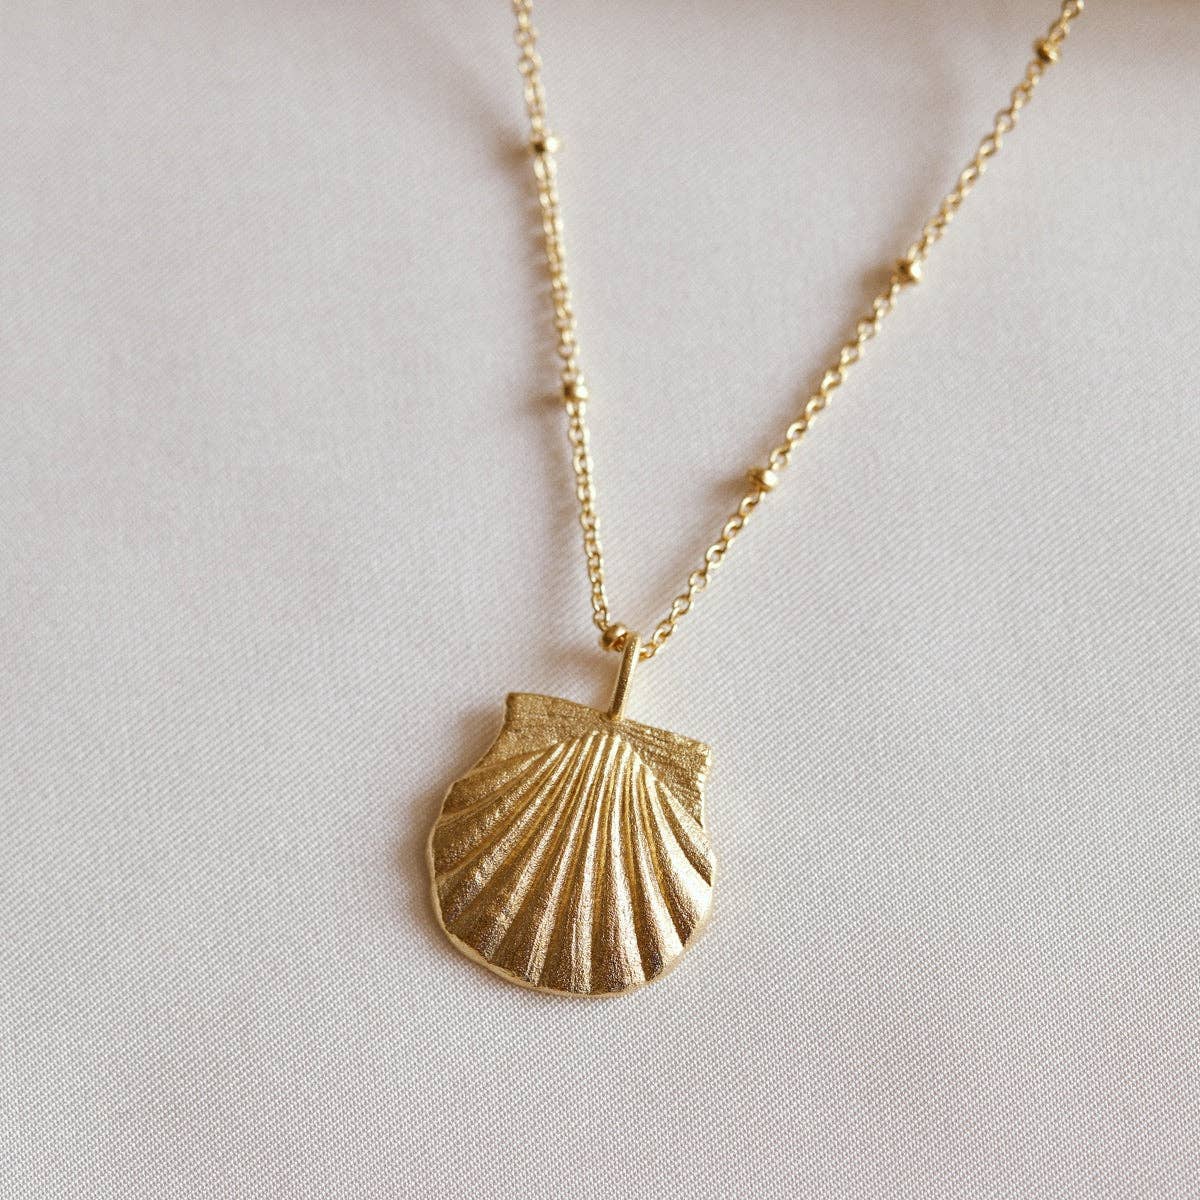 Milos Necklace | Jewelry Gold Gift Waterproof - Out of the Blue